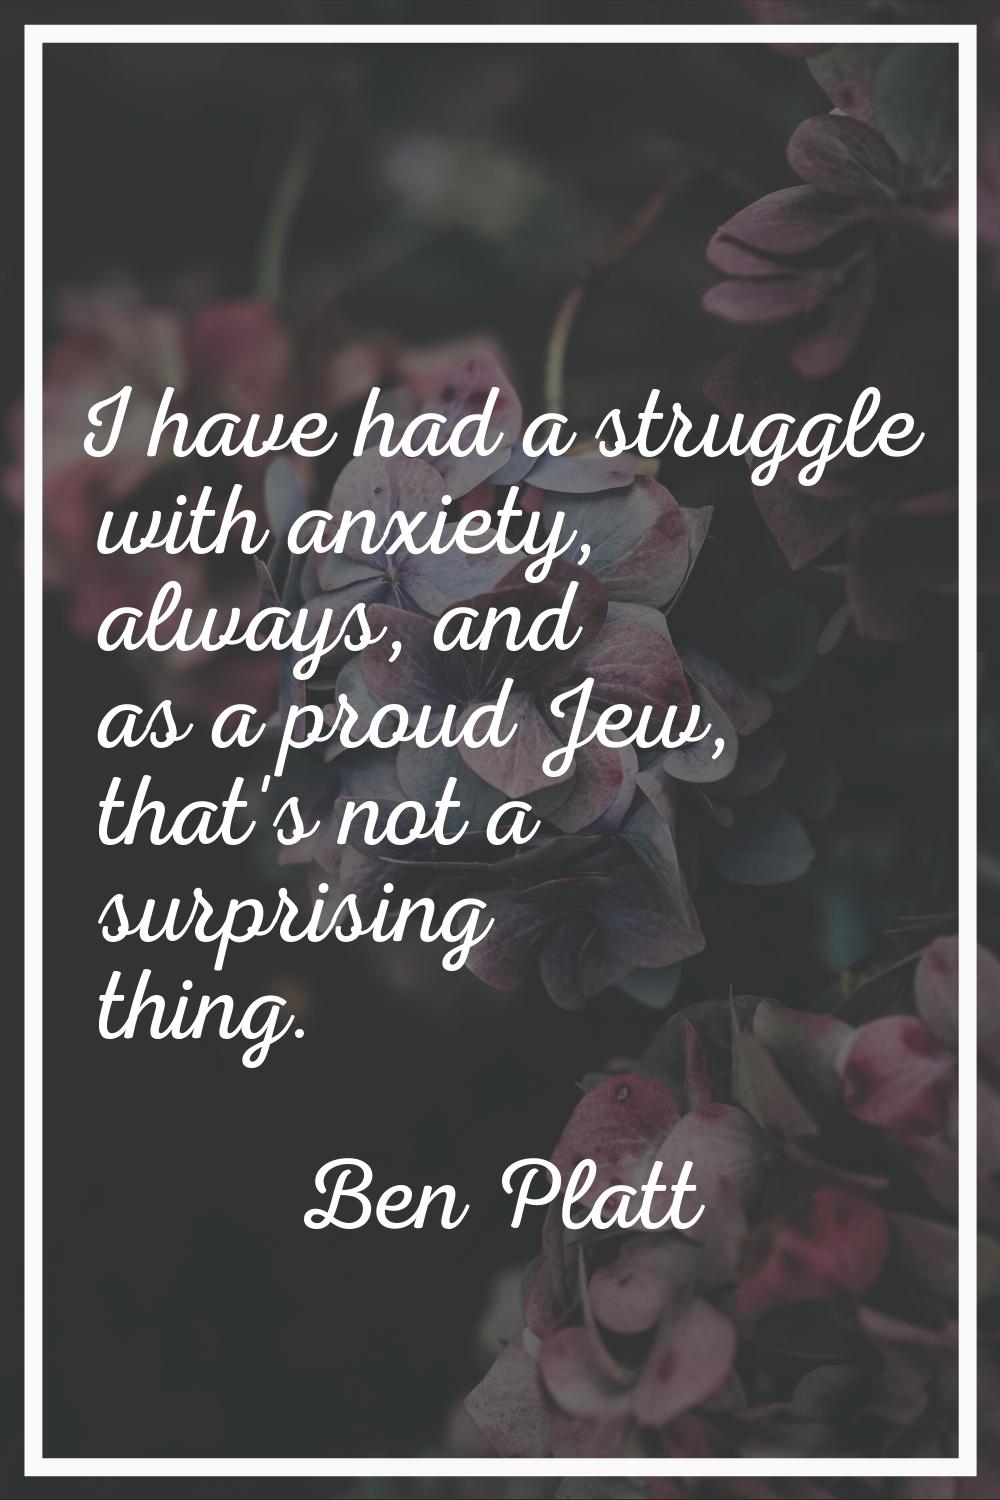 I have had a struggle with anxiety, always, and as a proud Jew, that's not a surprising thing.